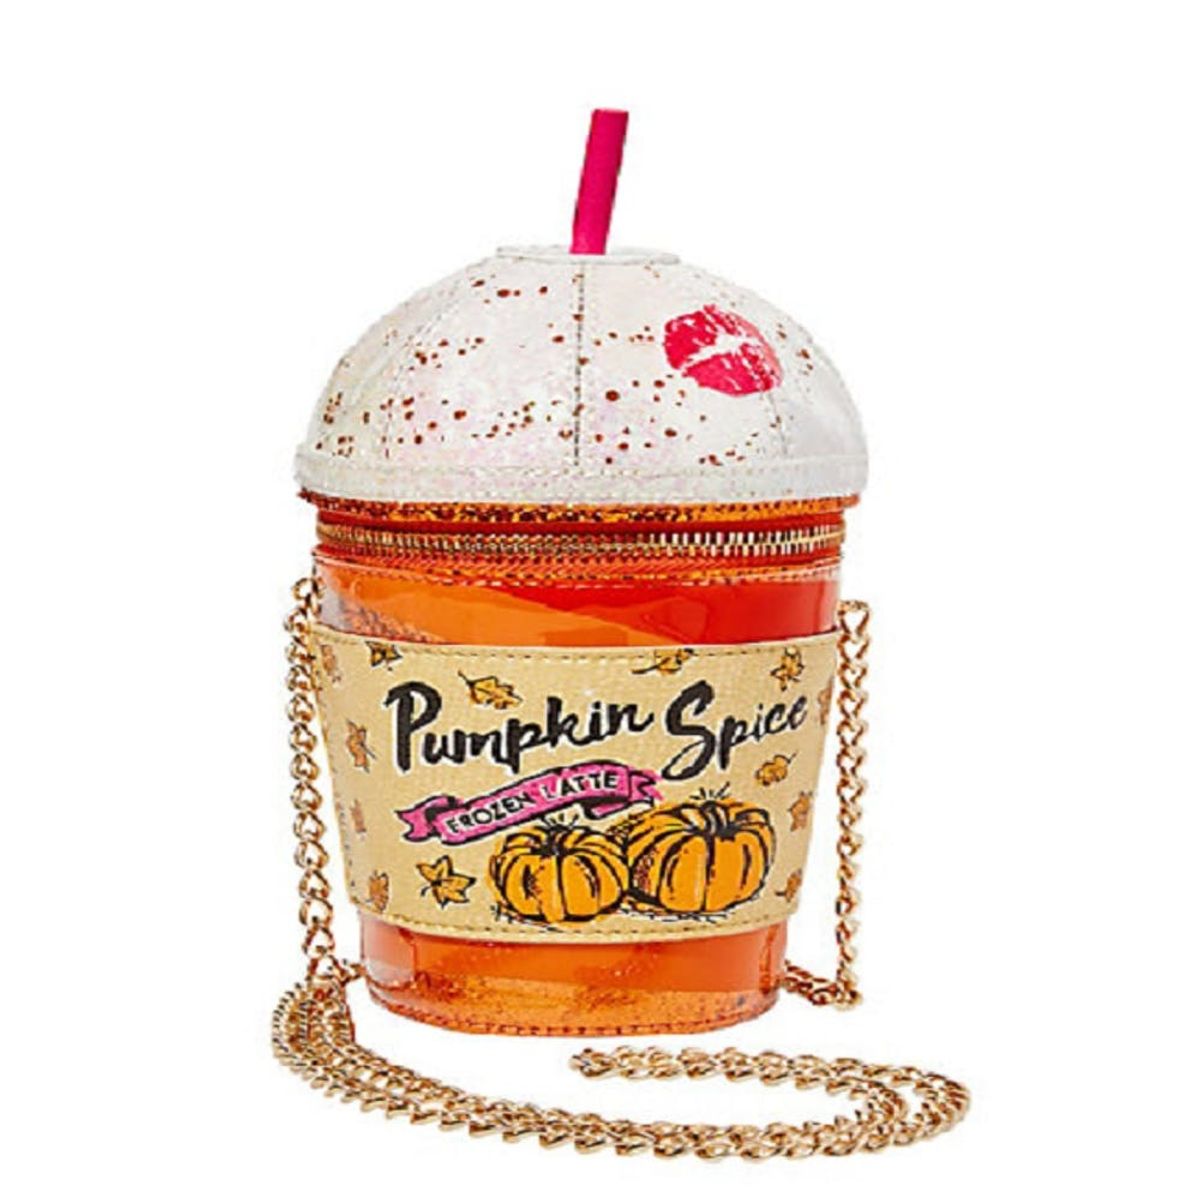 PSL Lovers, You Need This Pumpkin Spice Latte Purse